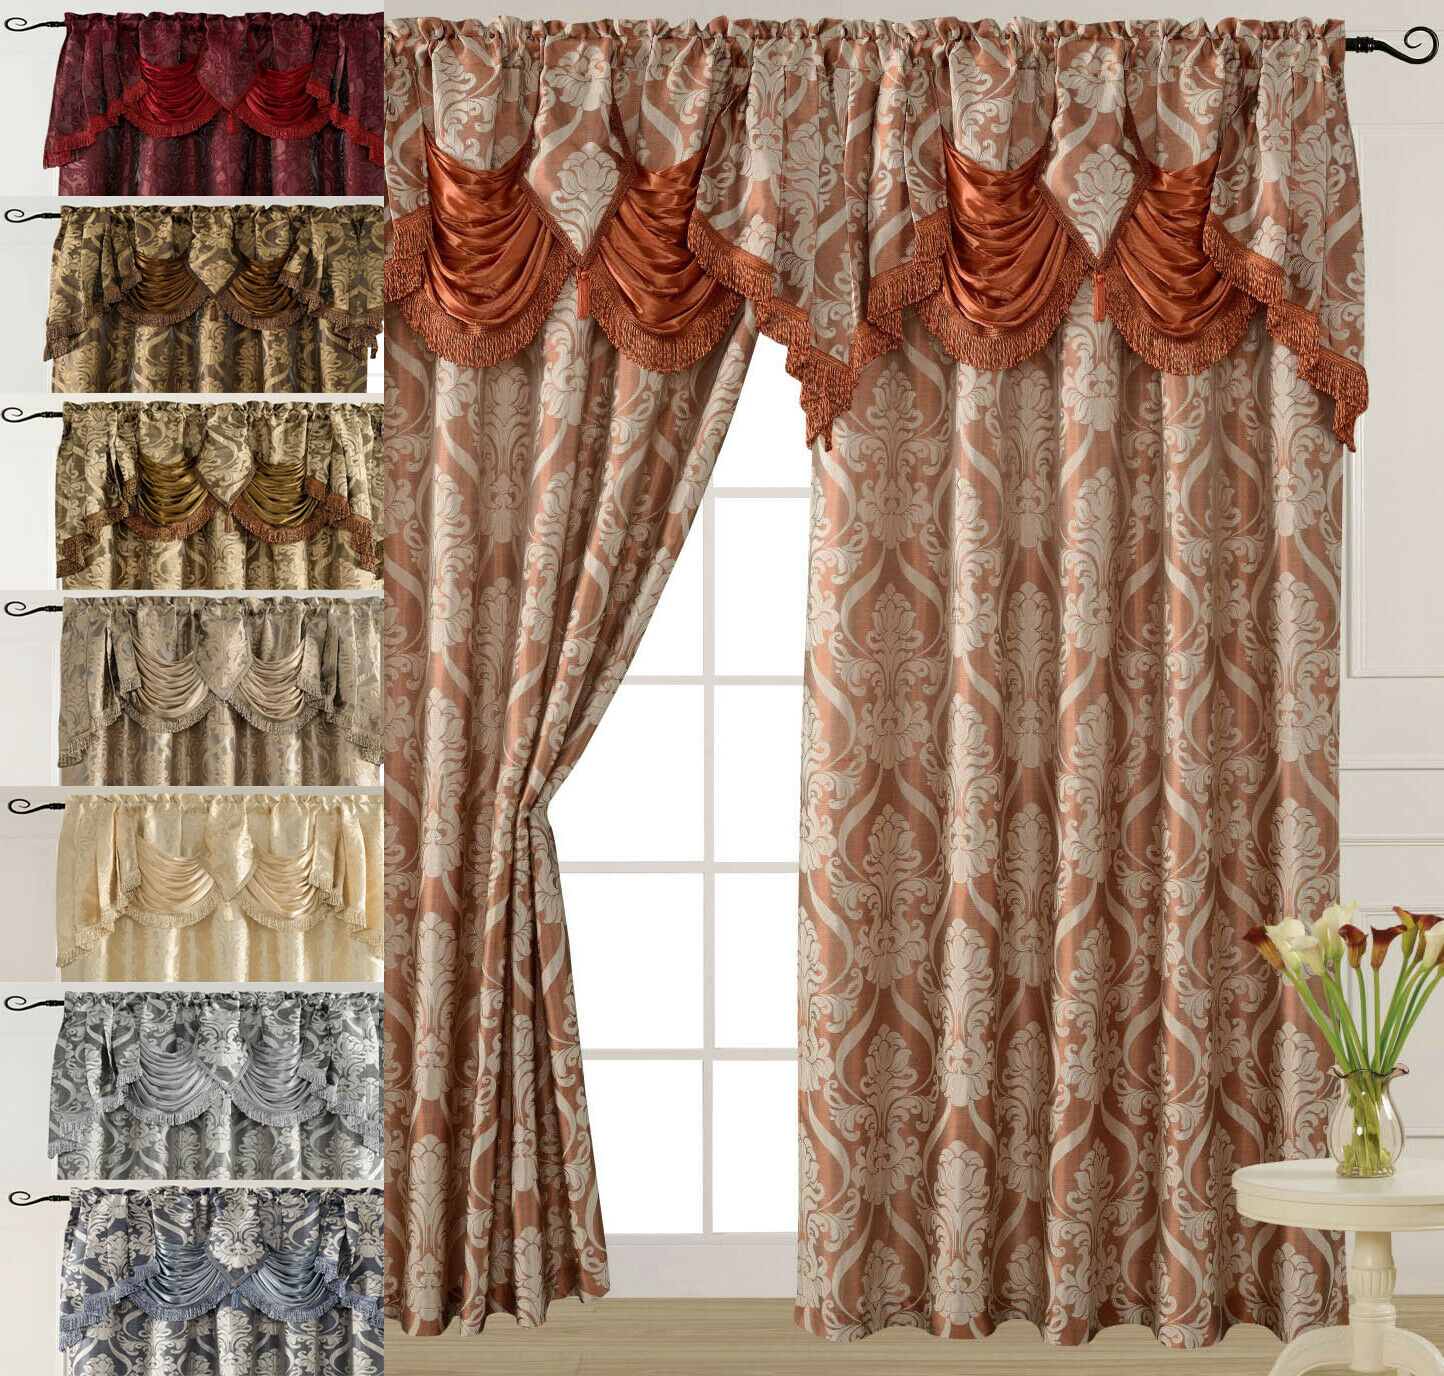 Luxury Jacquard Curtain Panel With Attached Waterfall Valance 54" X 84" Ashley